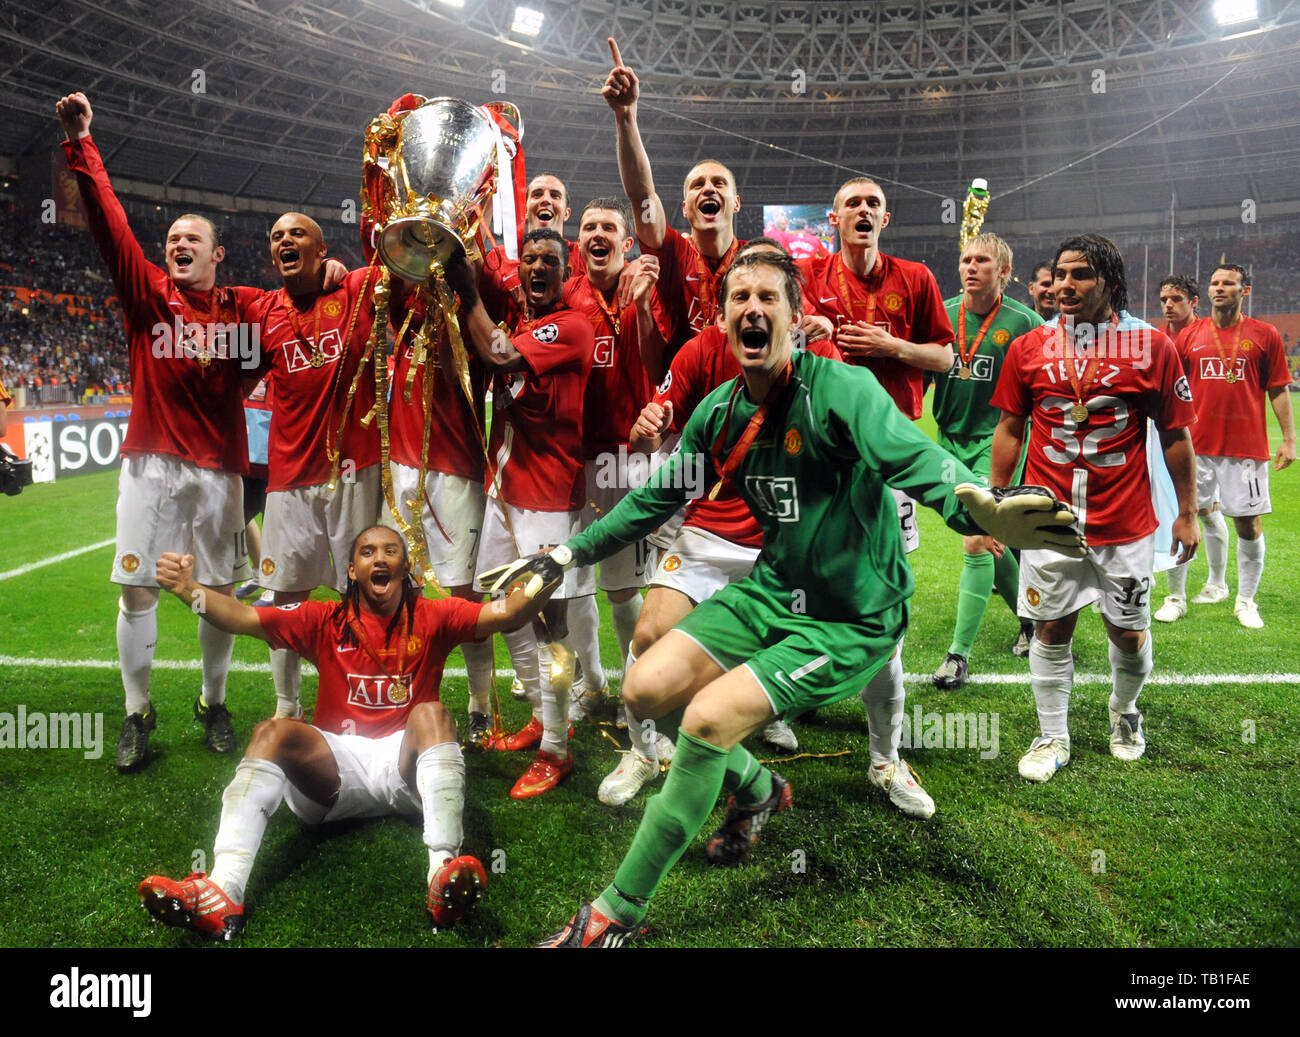 File dated 21-05-2008 of Manchester United celebrate winning the UEFA Champions League Final at the Luzhniki Stadium, Moscow, Russia Stock Photo - Alamy